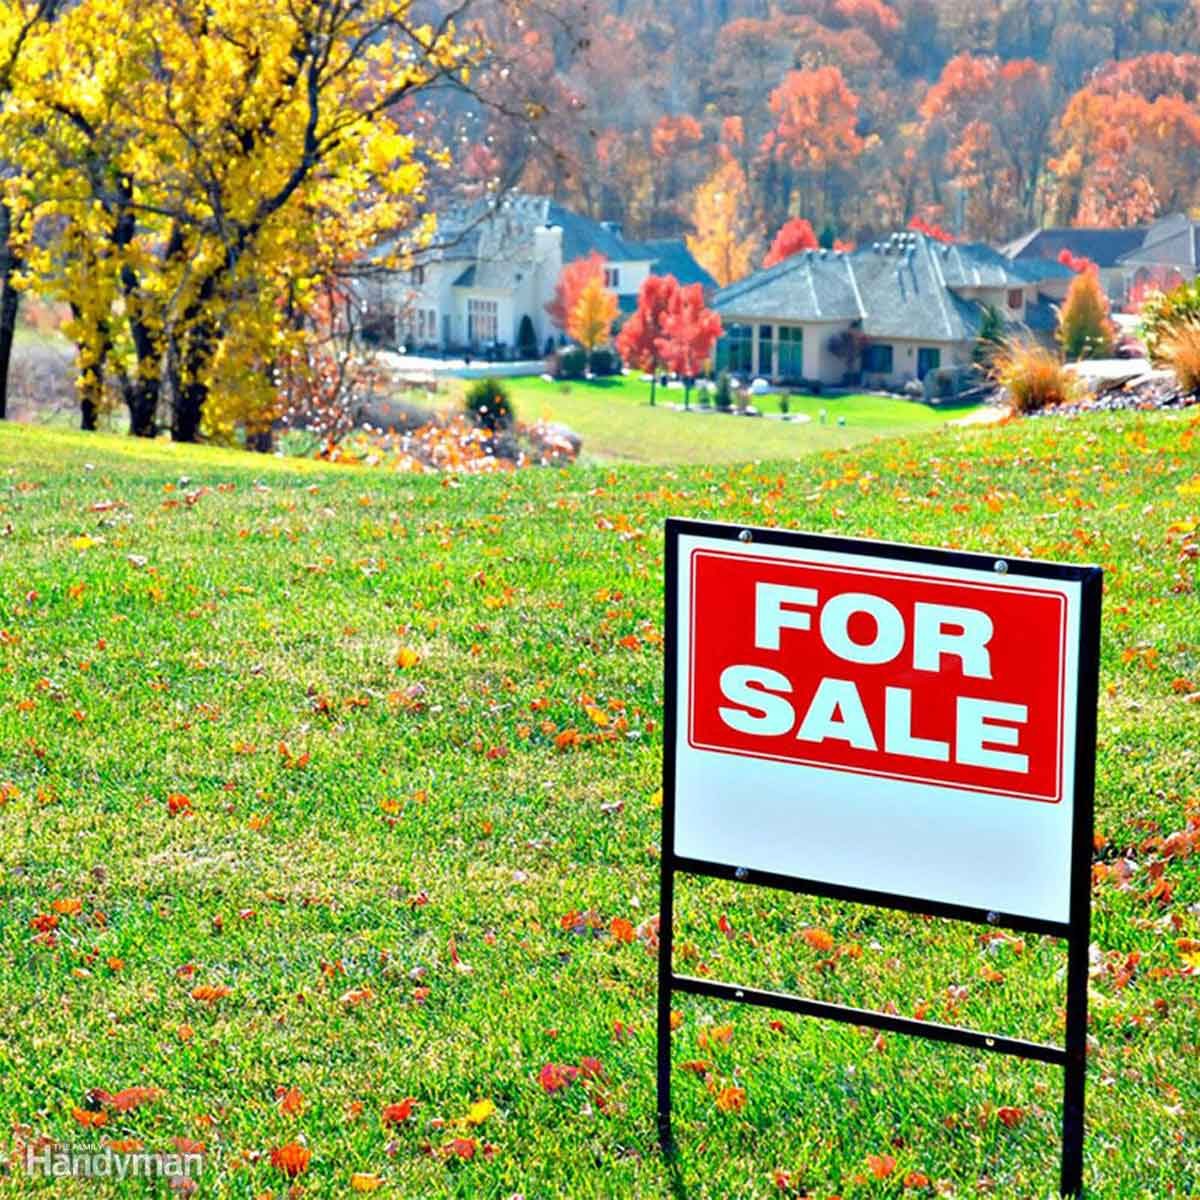 For sale sign house buying a home house hunting checklist